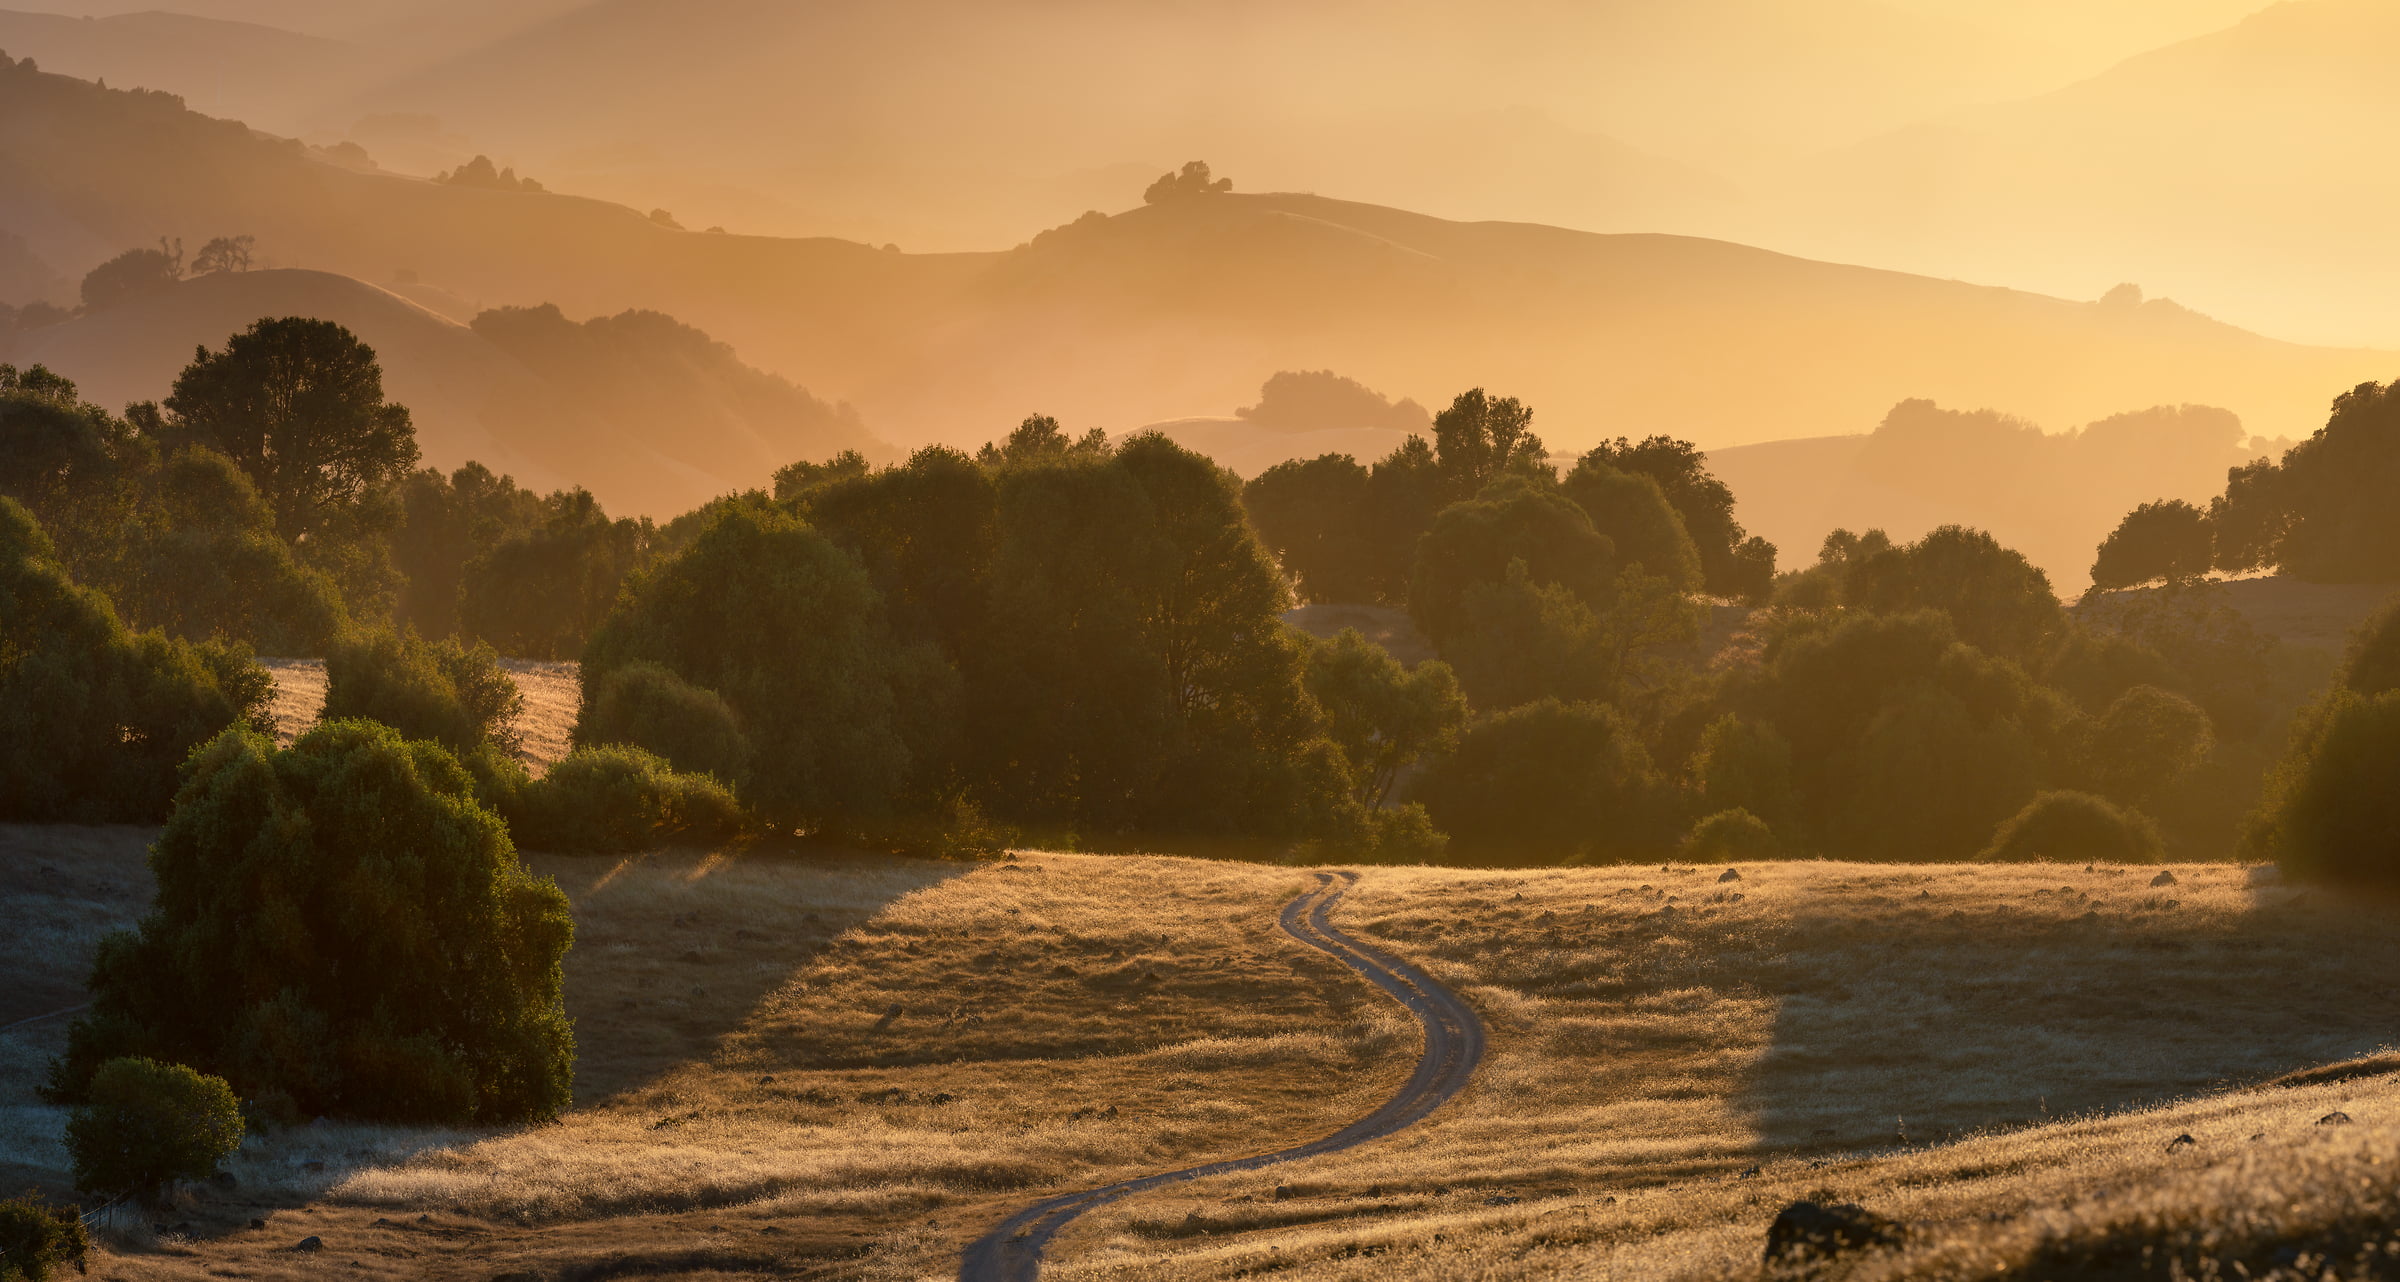 214 megapixels! A very high resolution, large-format VAST photo print of a golden sunset landscape with trees, hills, and a dirt road; landscape photograph created by Jeff Lewis in Marin County, California.